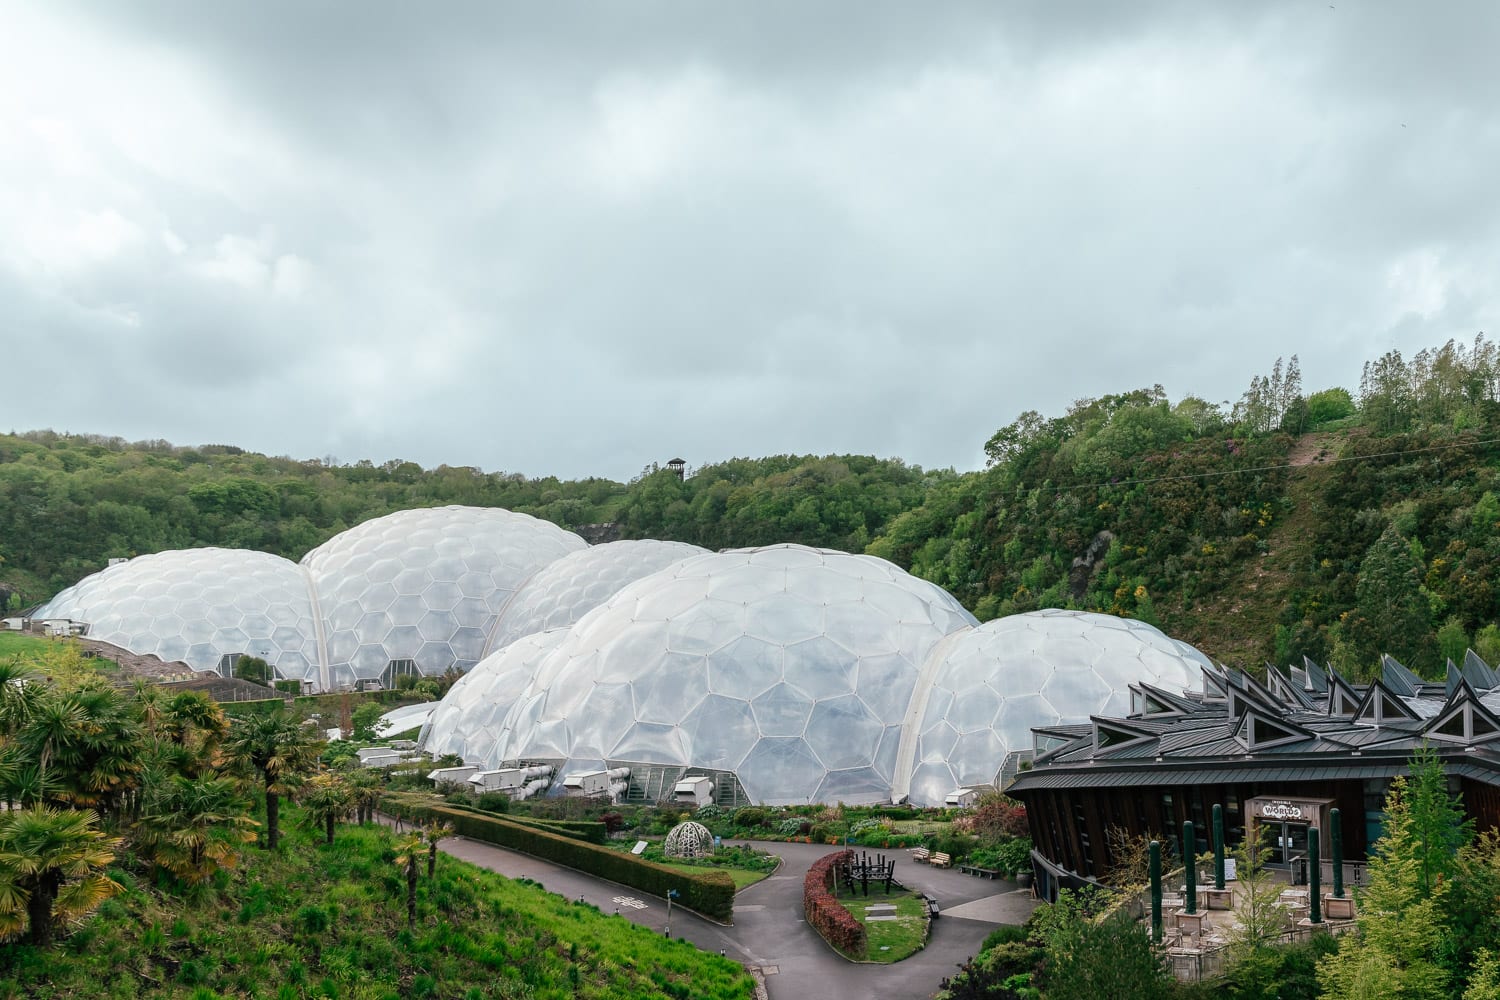 Eden Project | Attractions in Cornwall, England, UK